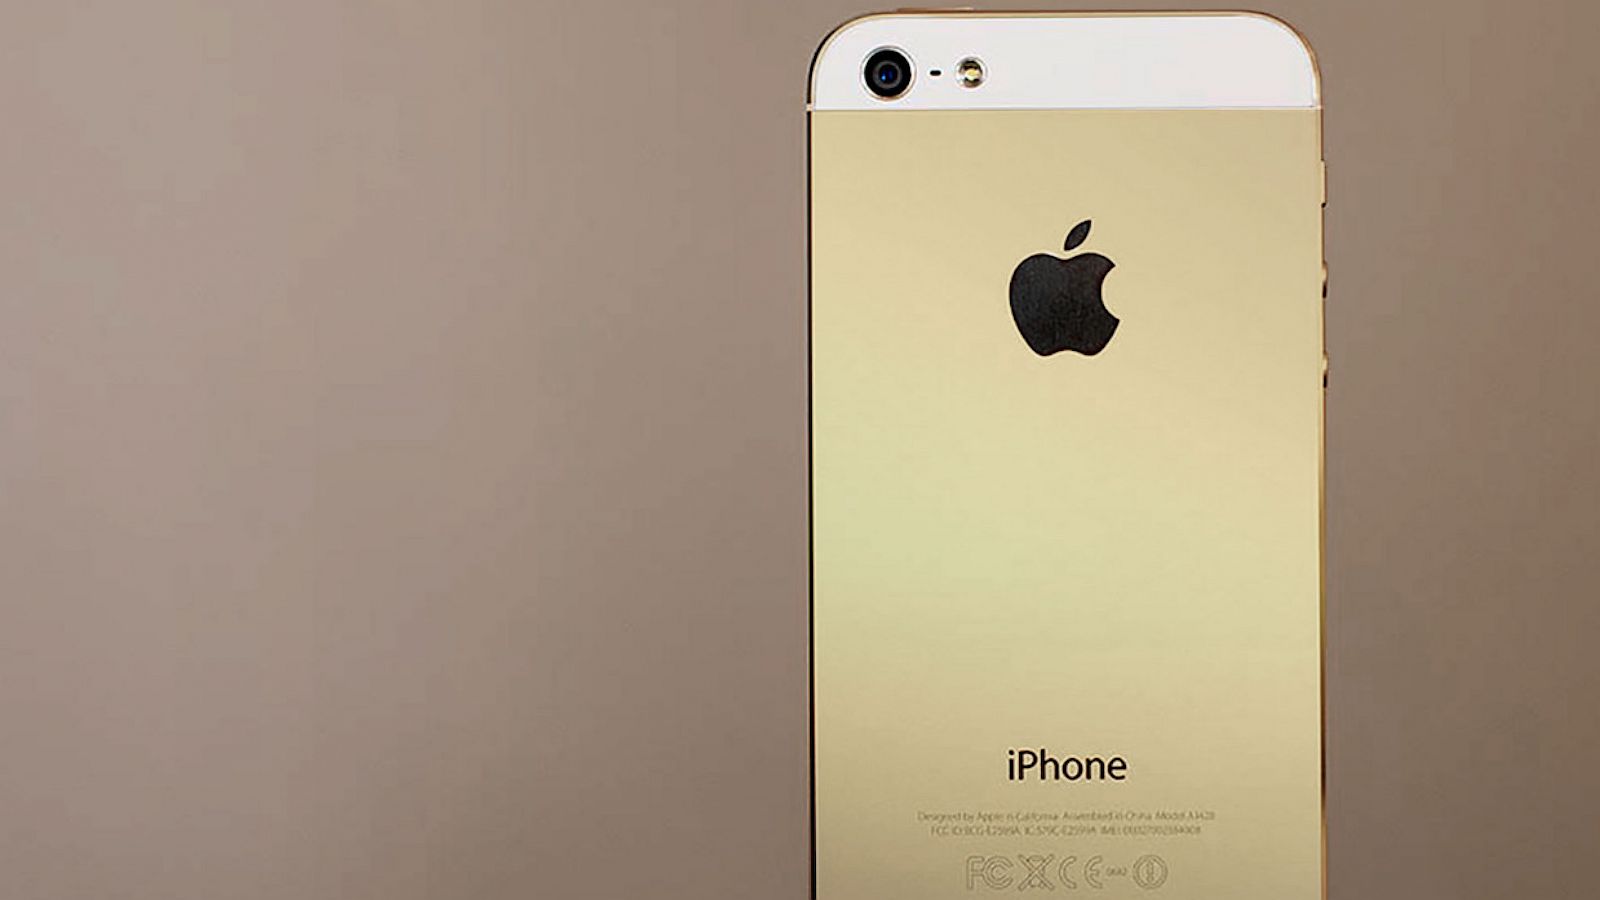 iphone 5s in black and gold